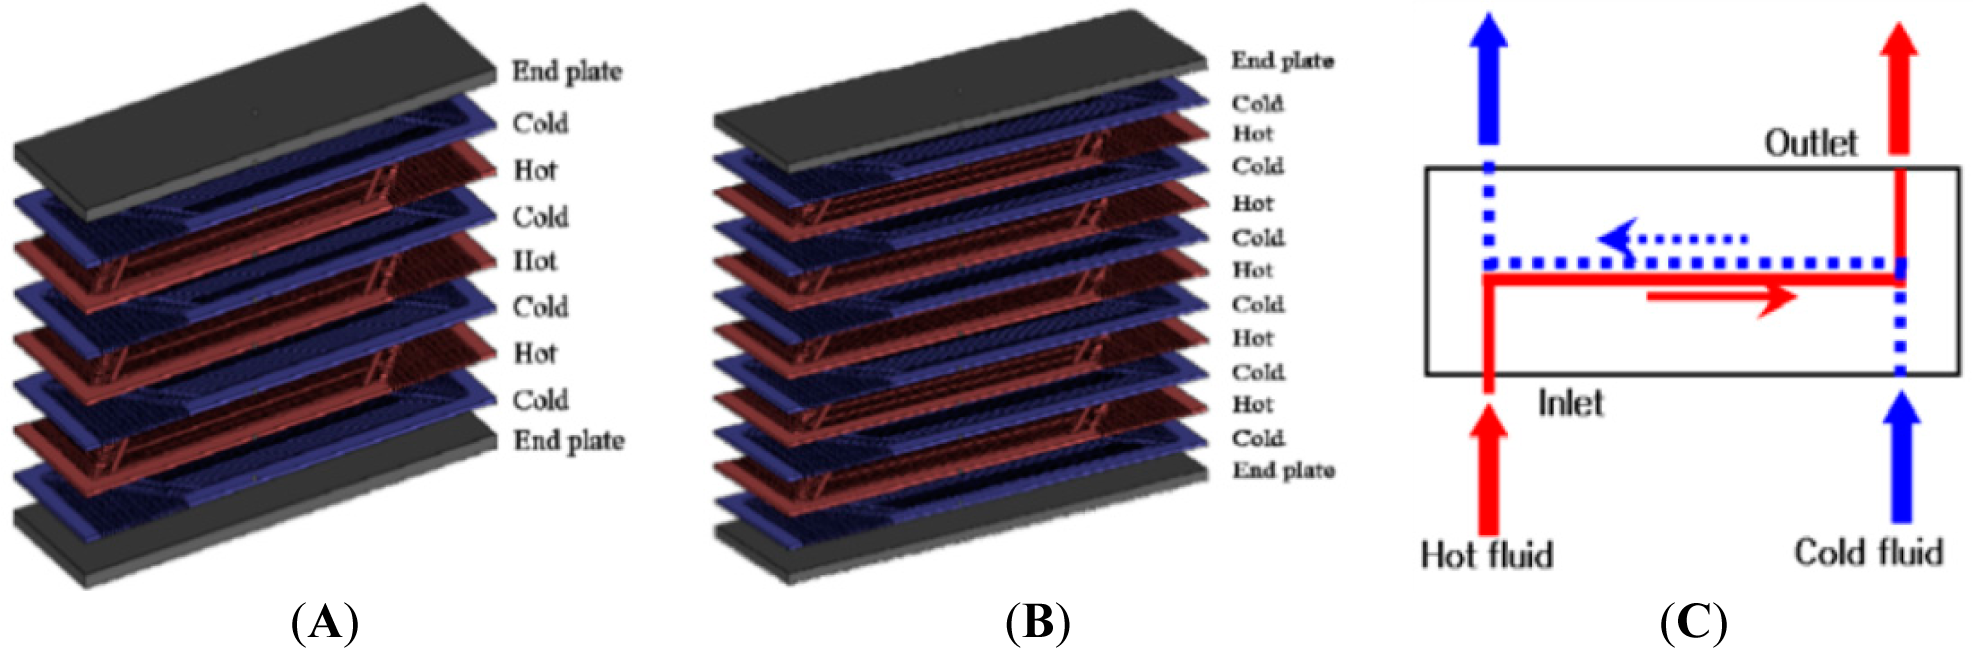 Pinpoint Erobrer kig ind Entropy | Free Full-Text | Heat Transfer and Pressure Drop Characteristics  in Straight Microchannel of Printed Circuit Heat Exchangers